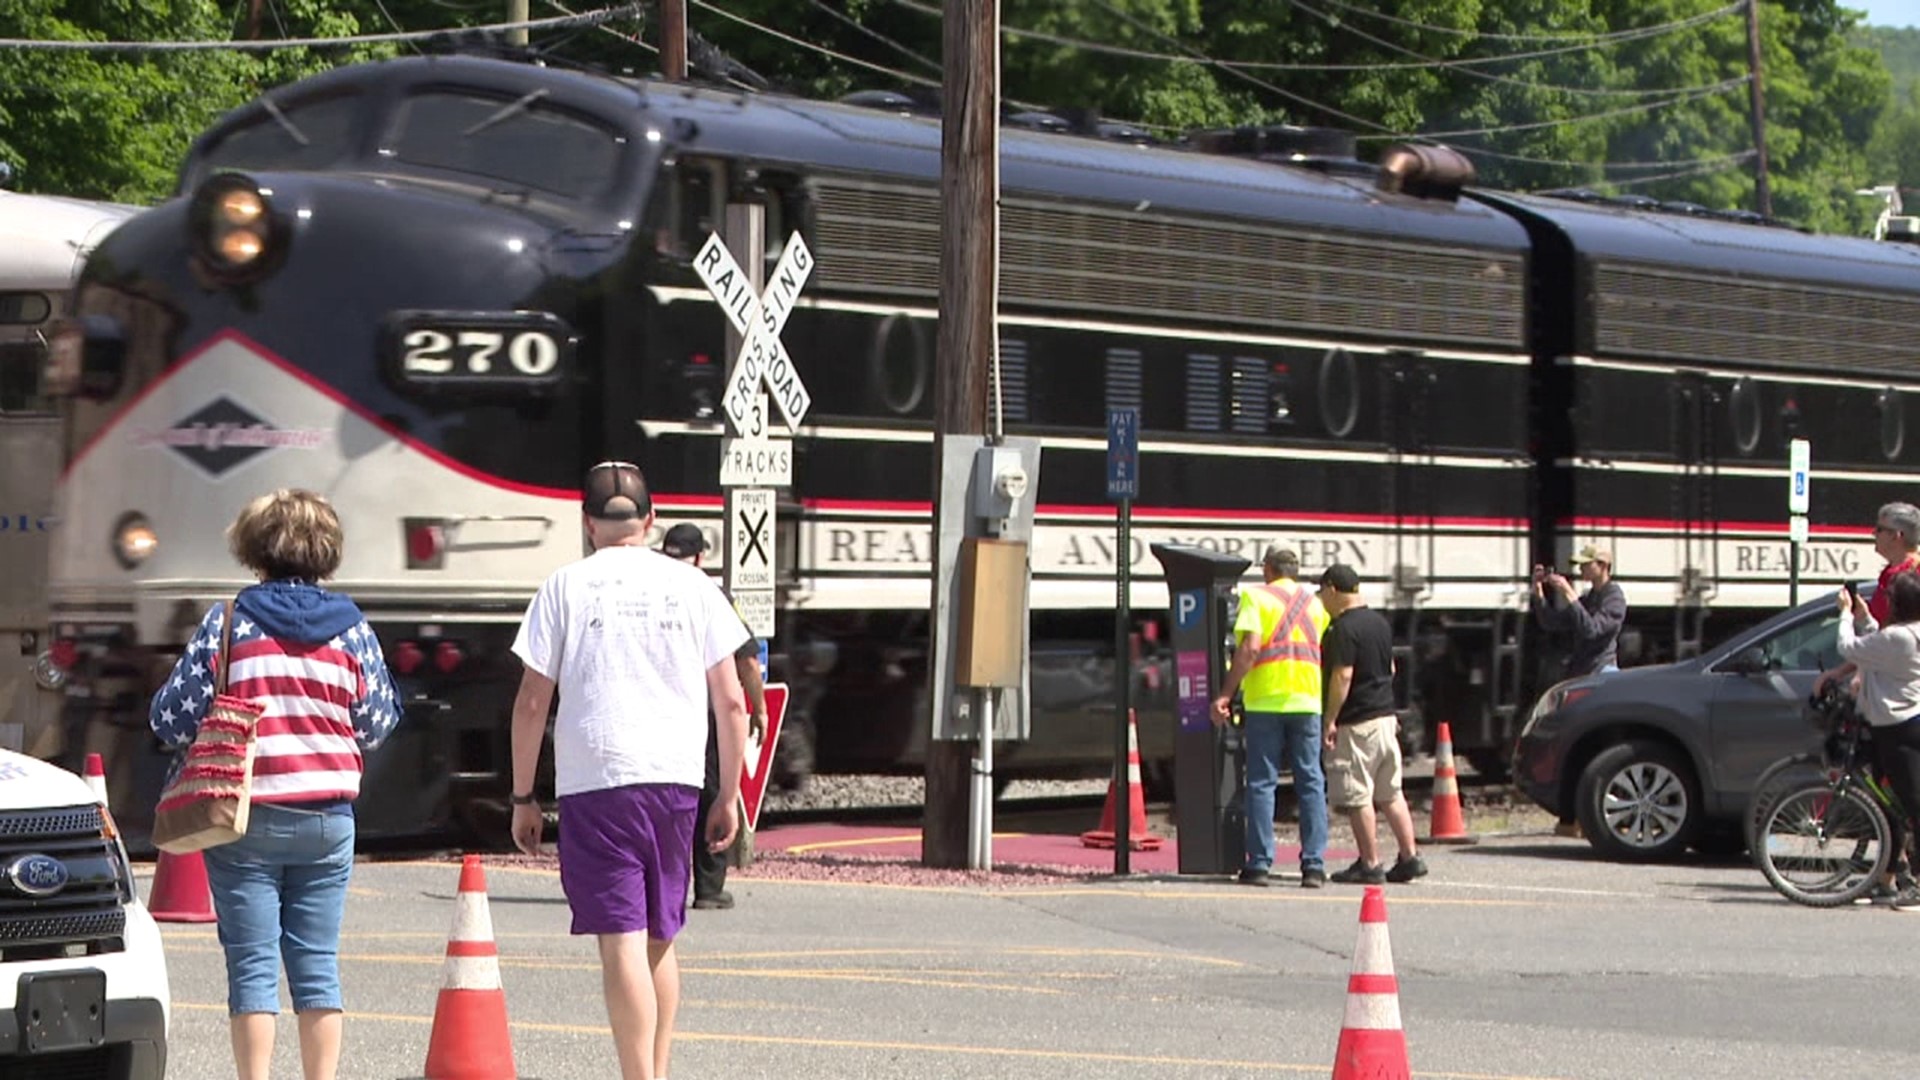 The highly anticipated train ride took off Saturday morning in Luzerne County and made its way into Carbon County.